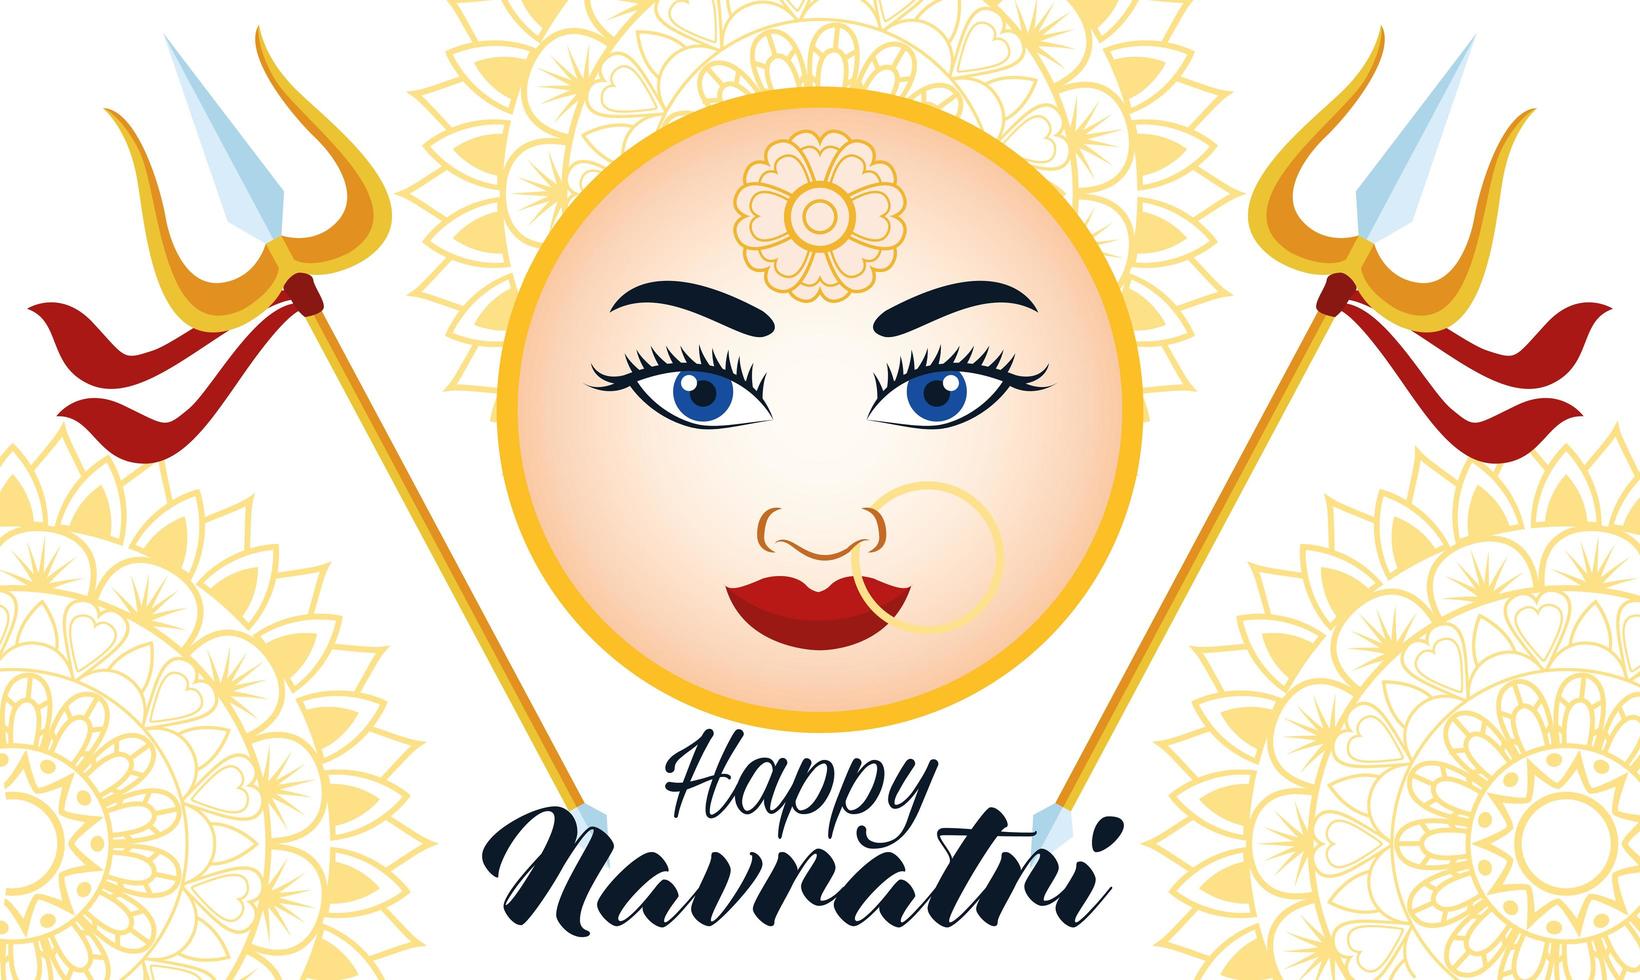 happy navratri celebration card with beautiful goddess face and tridents vector